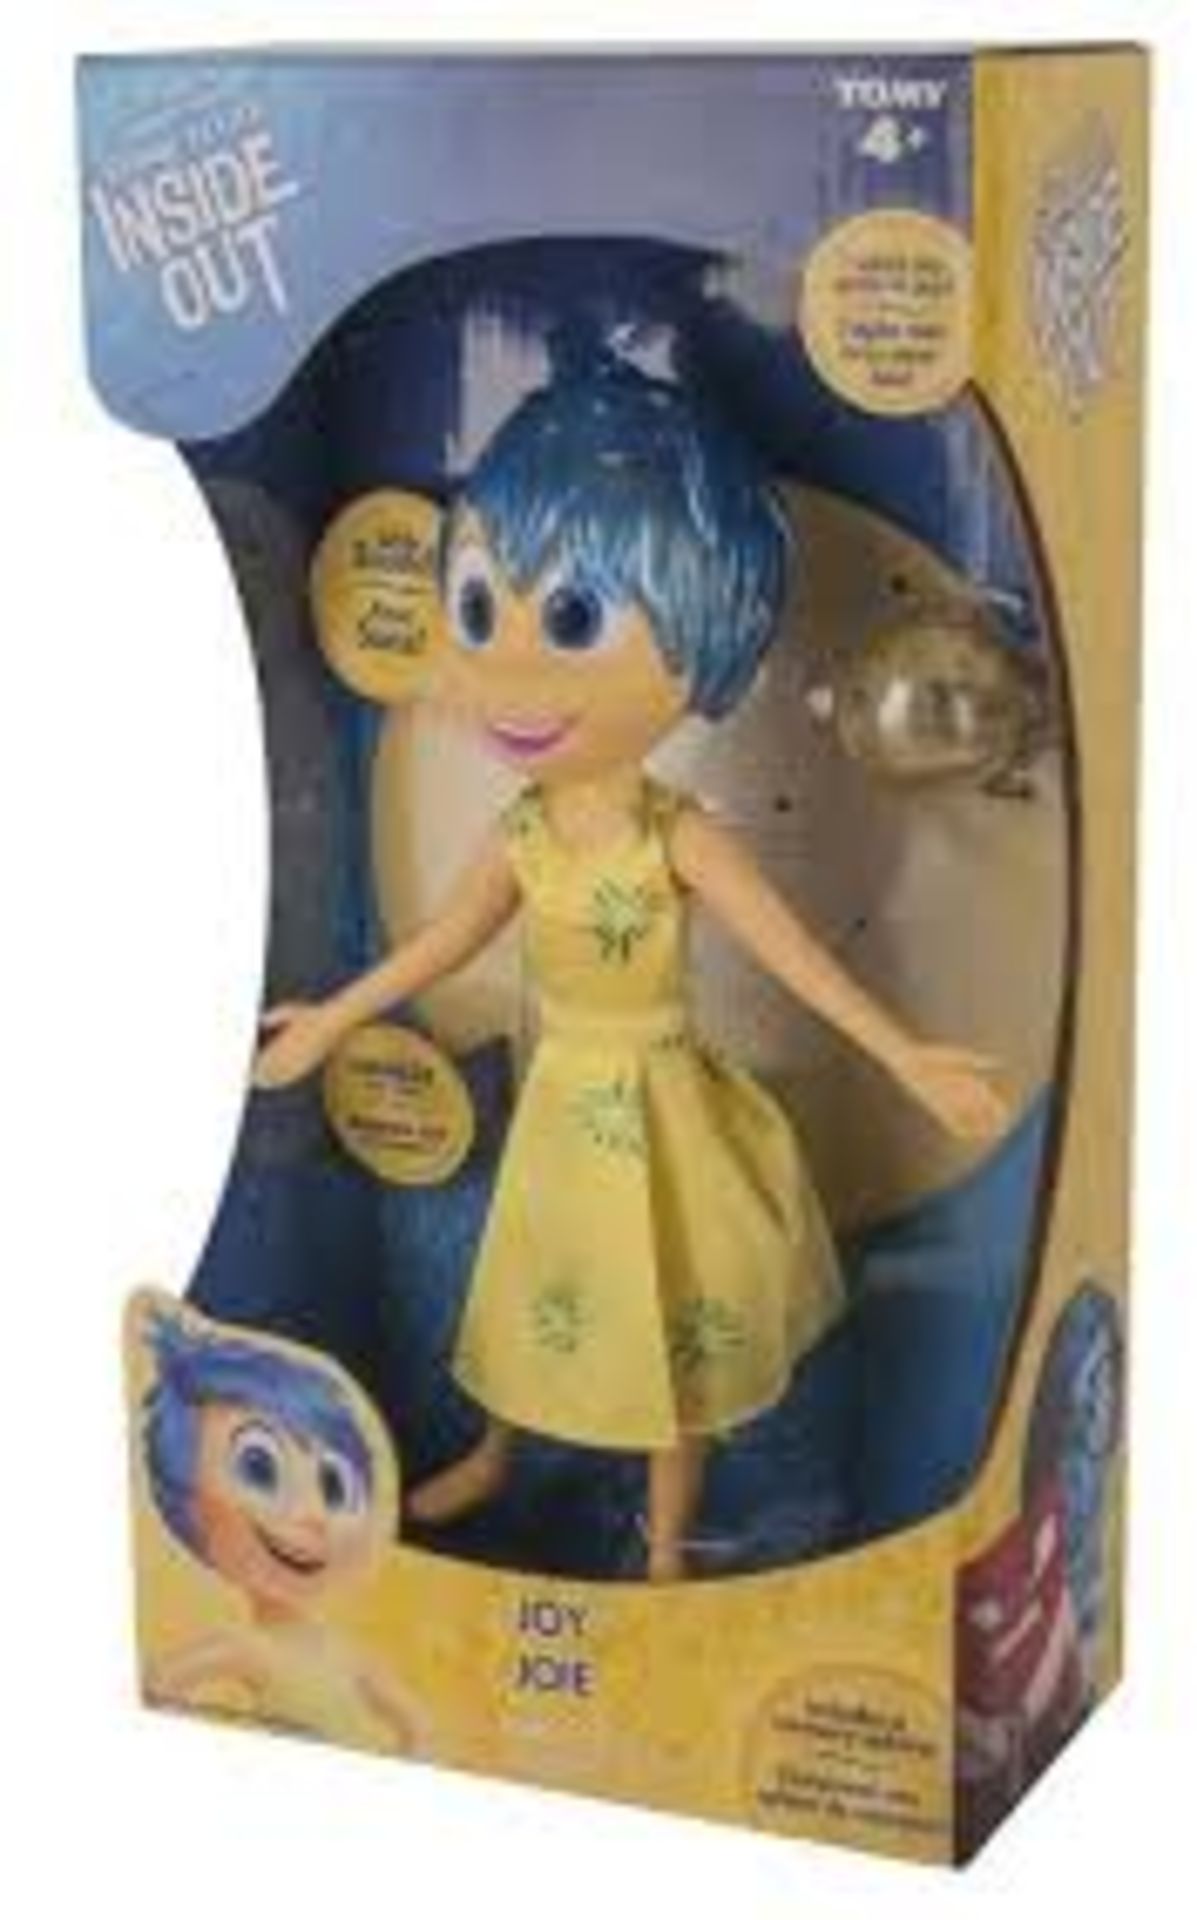 85 x Diney Pixar: Inside Out "Joy" Large Figure Doll Toy With Sound | 796714619033 | RRP £ 934.15